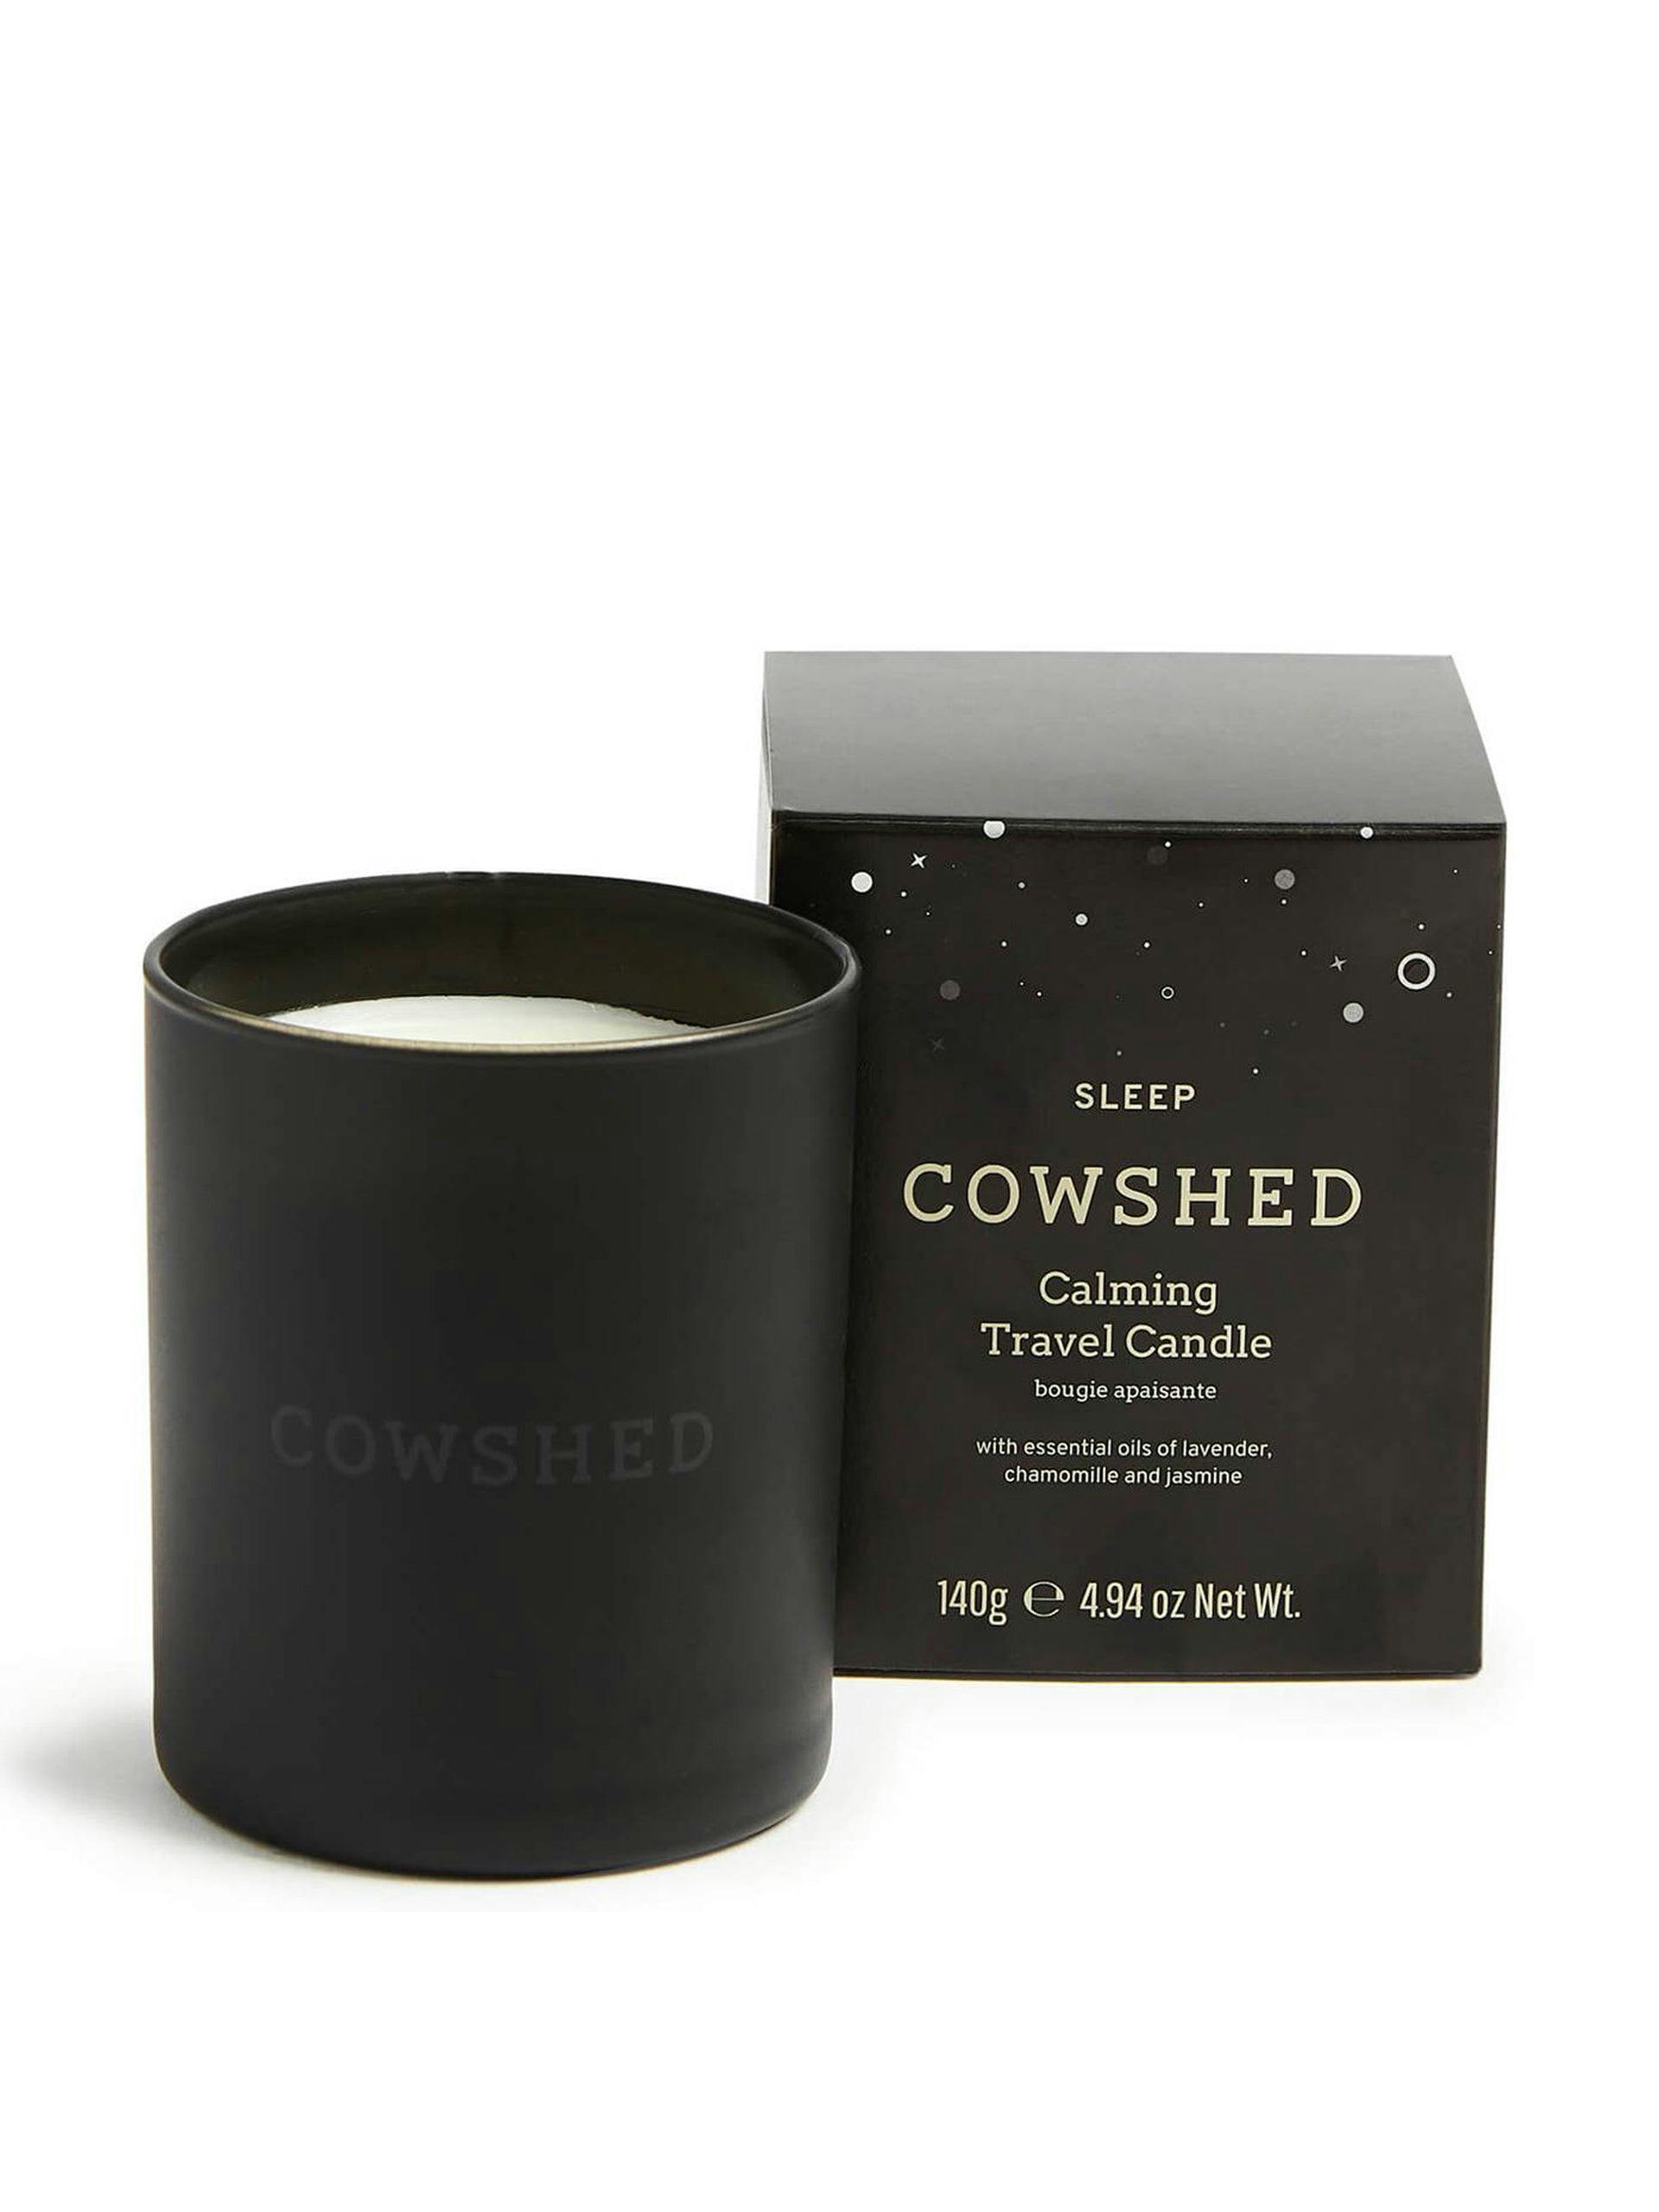 Calming scented travel candle